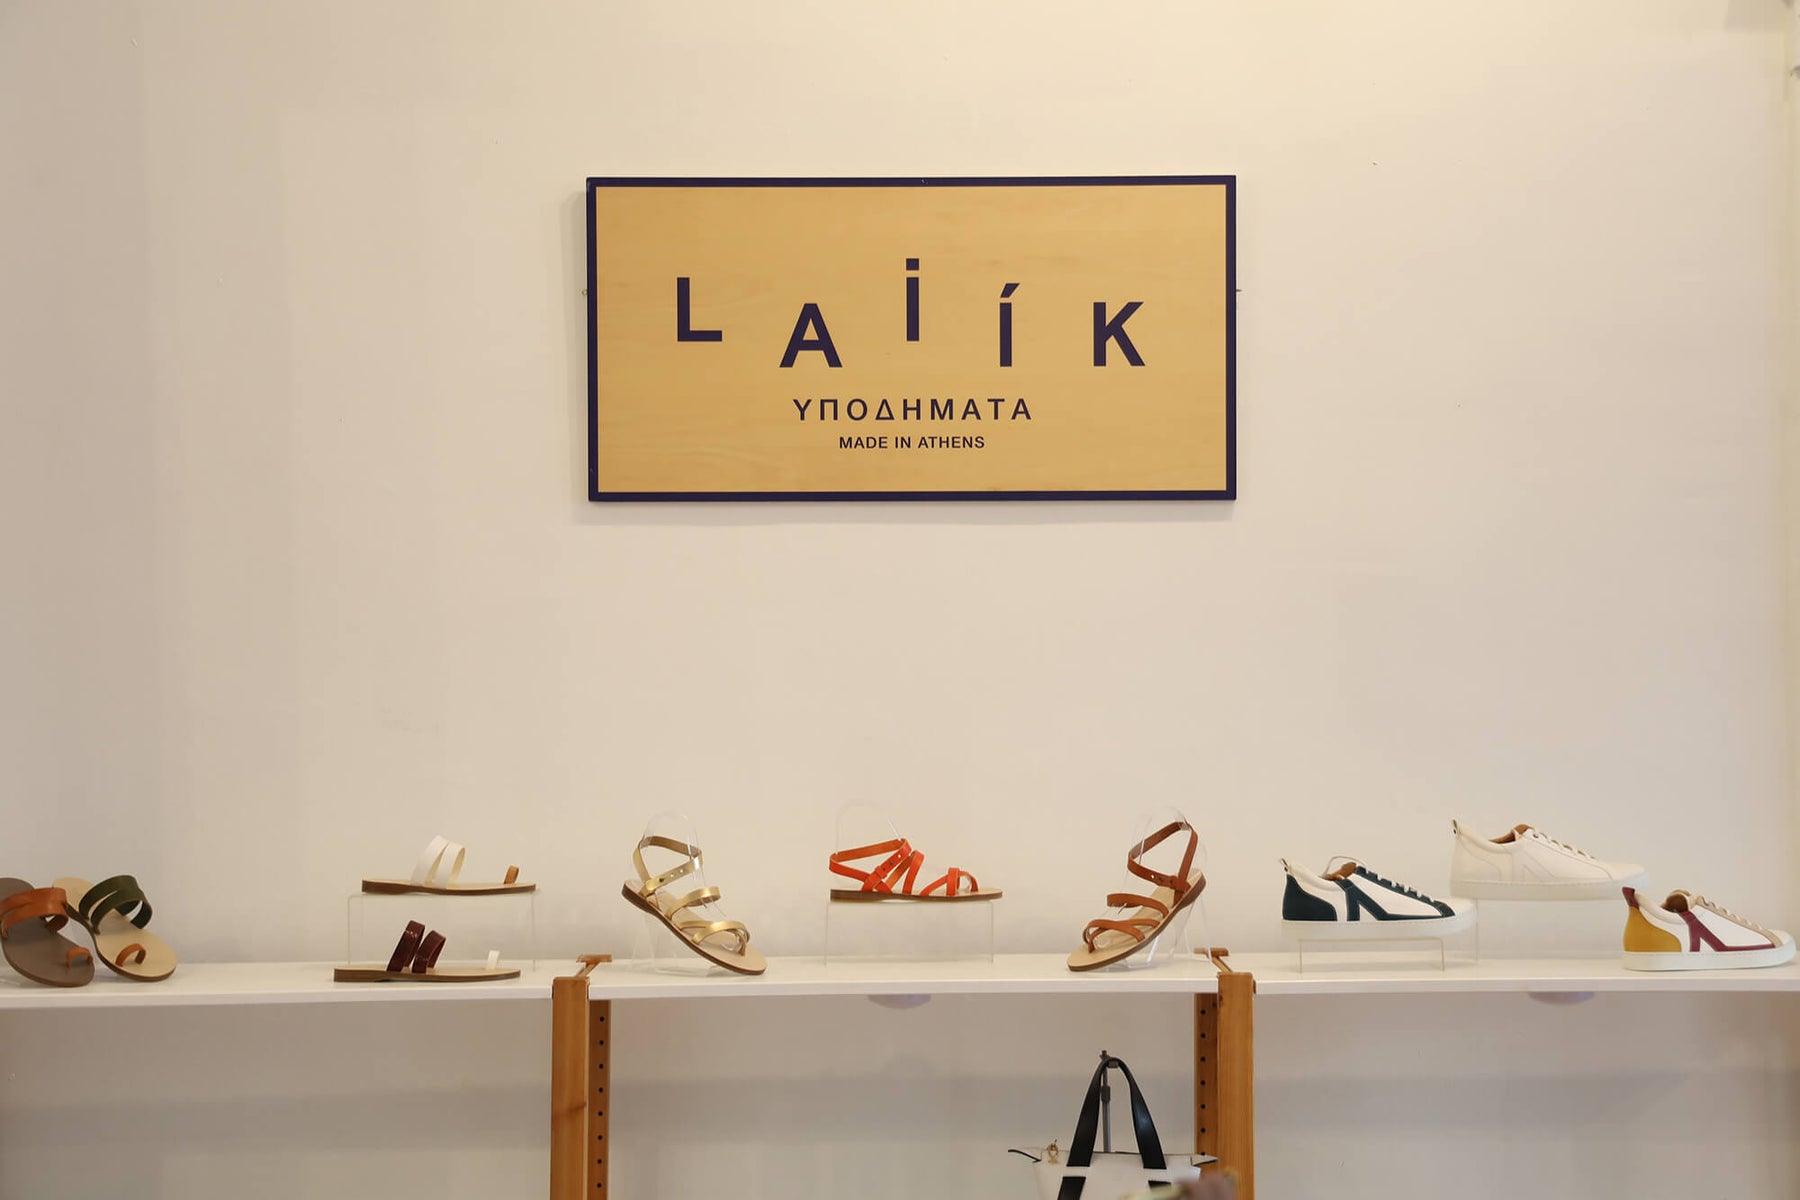 sign of laiik, sandals and shoes handmade in Greece at the store location in dupont circle, washington dc. shoe store in dupont circle